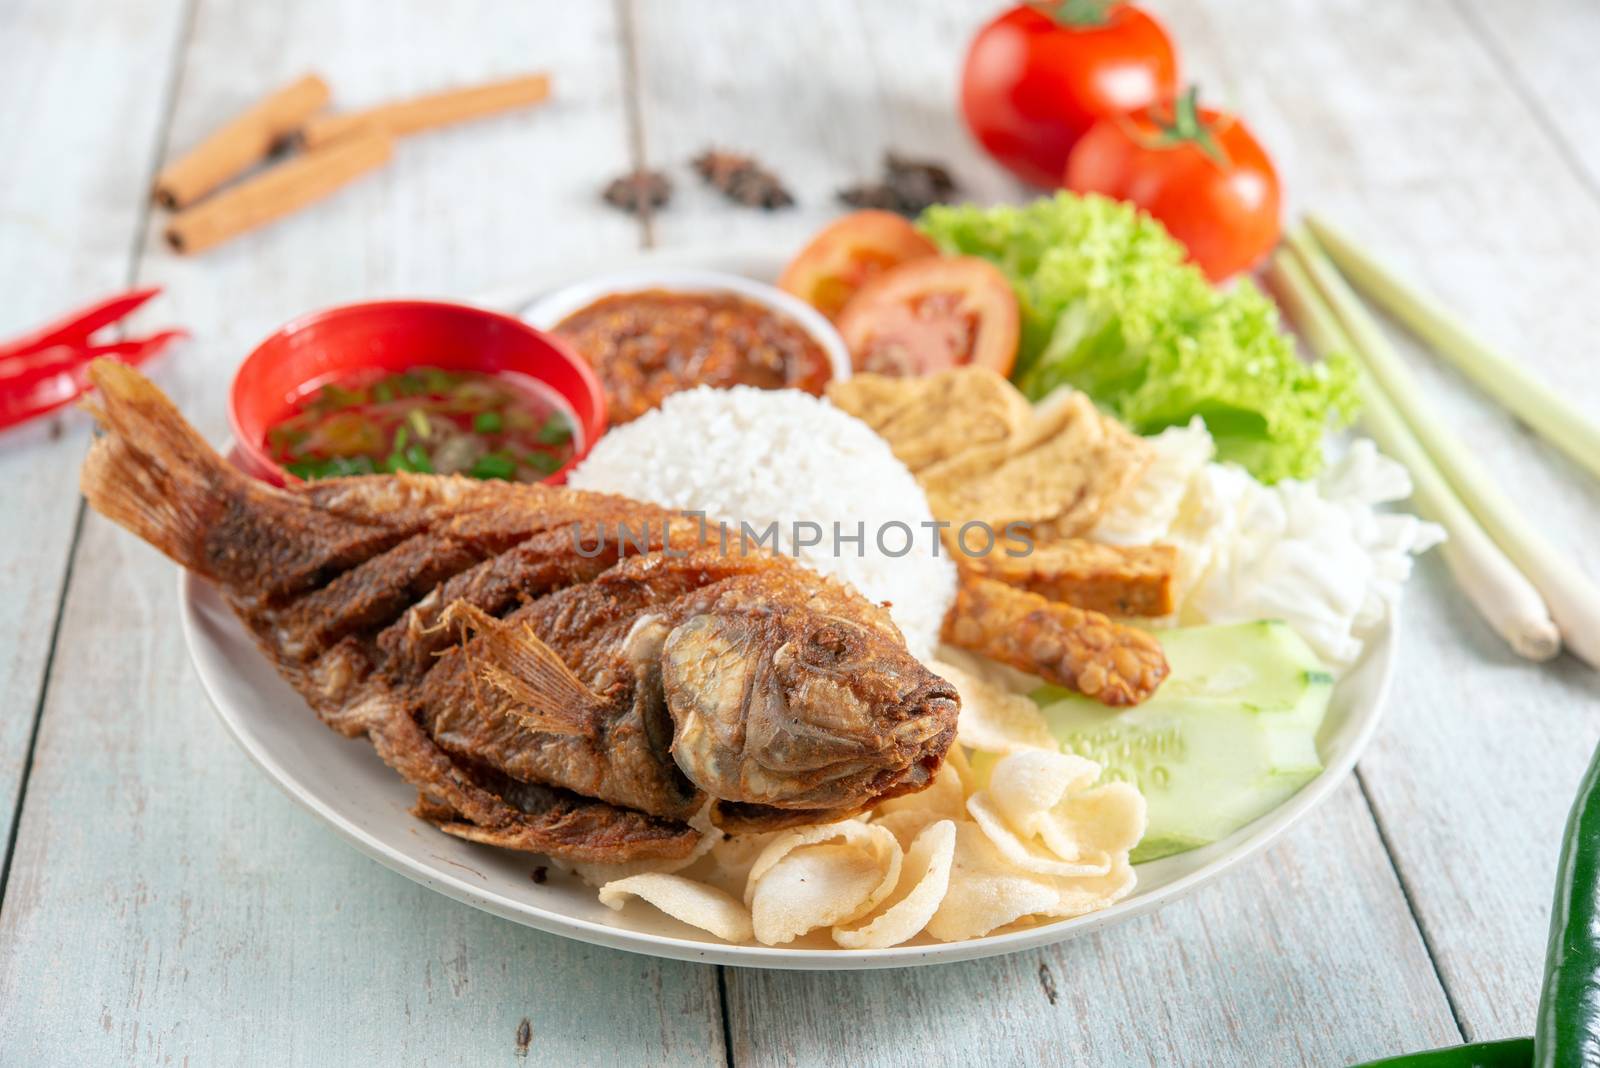 Fried tilapia fish and rice, popular traditional Malay or Indonesian local food.